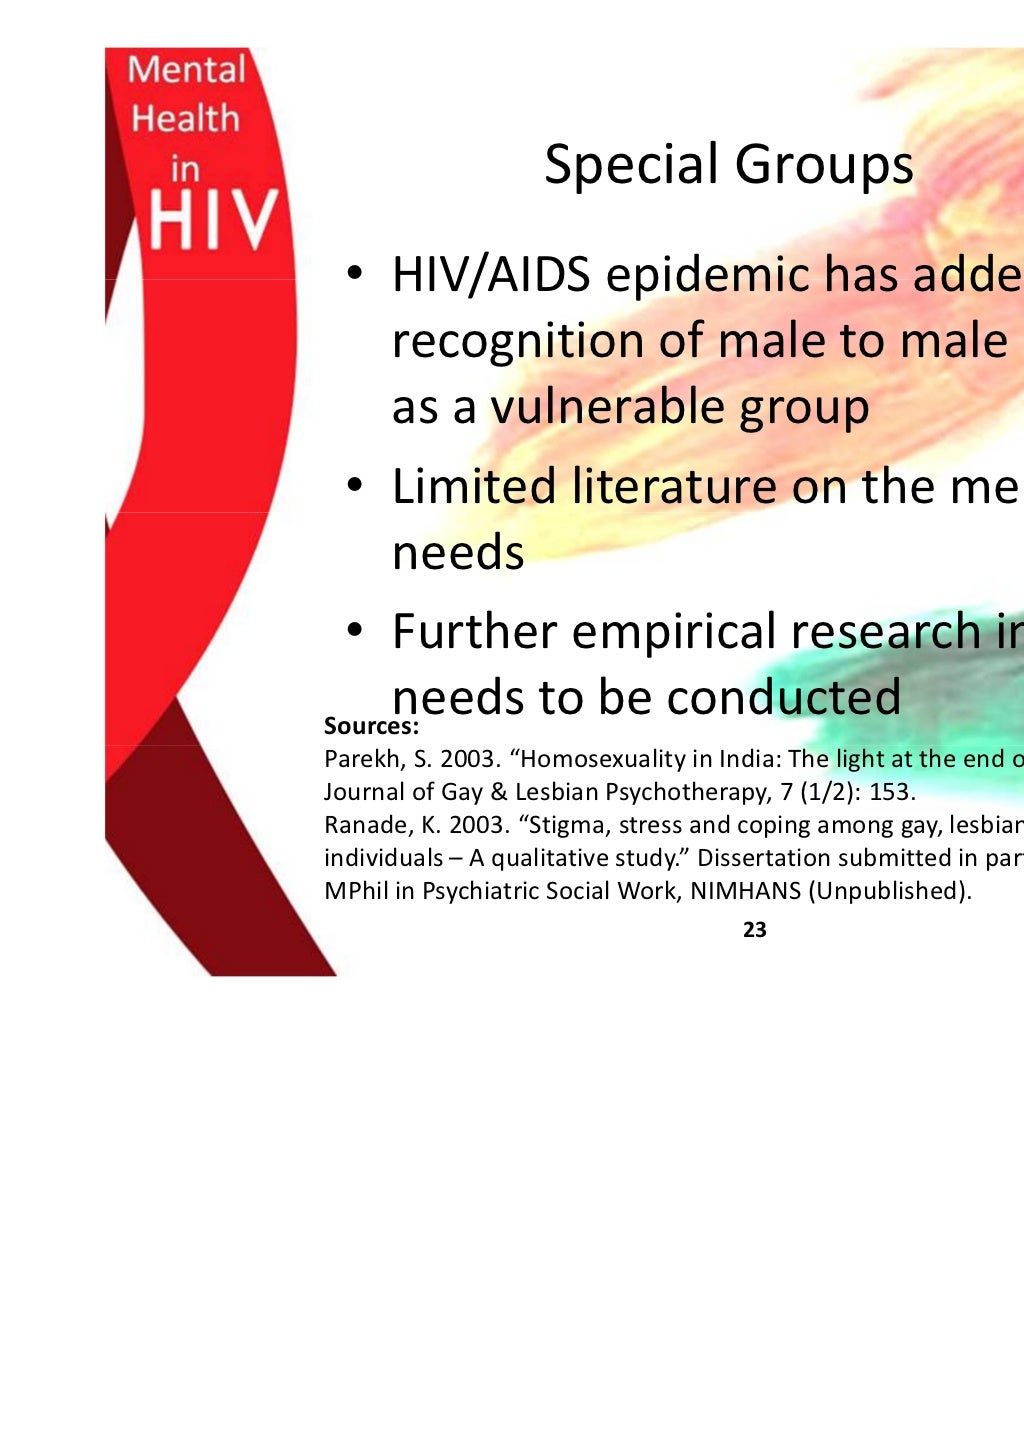 Mental health issues in HIV/AIDS - Indian Perspective by Kasi Sekar